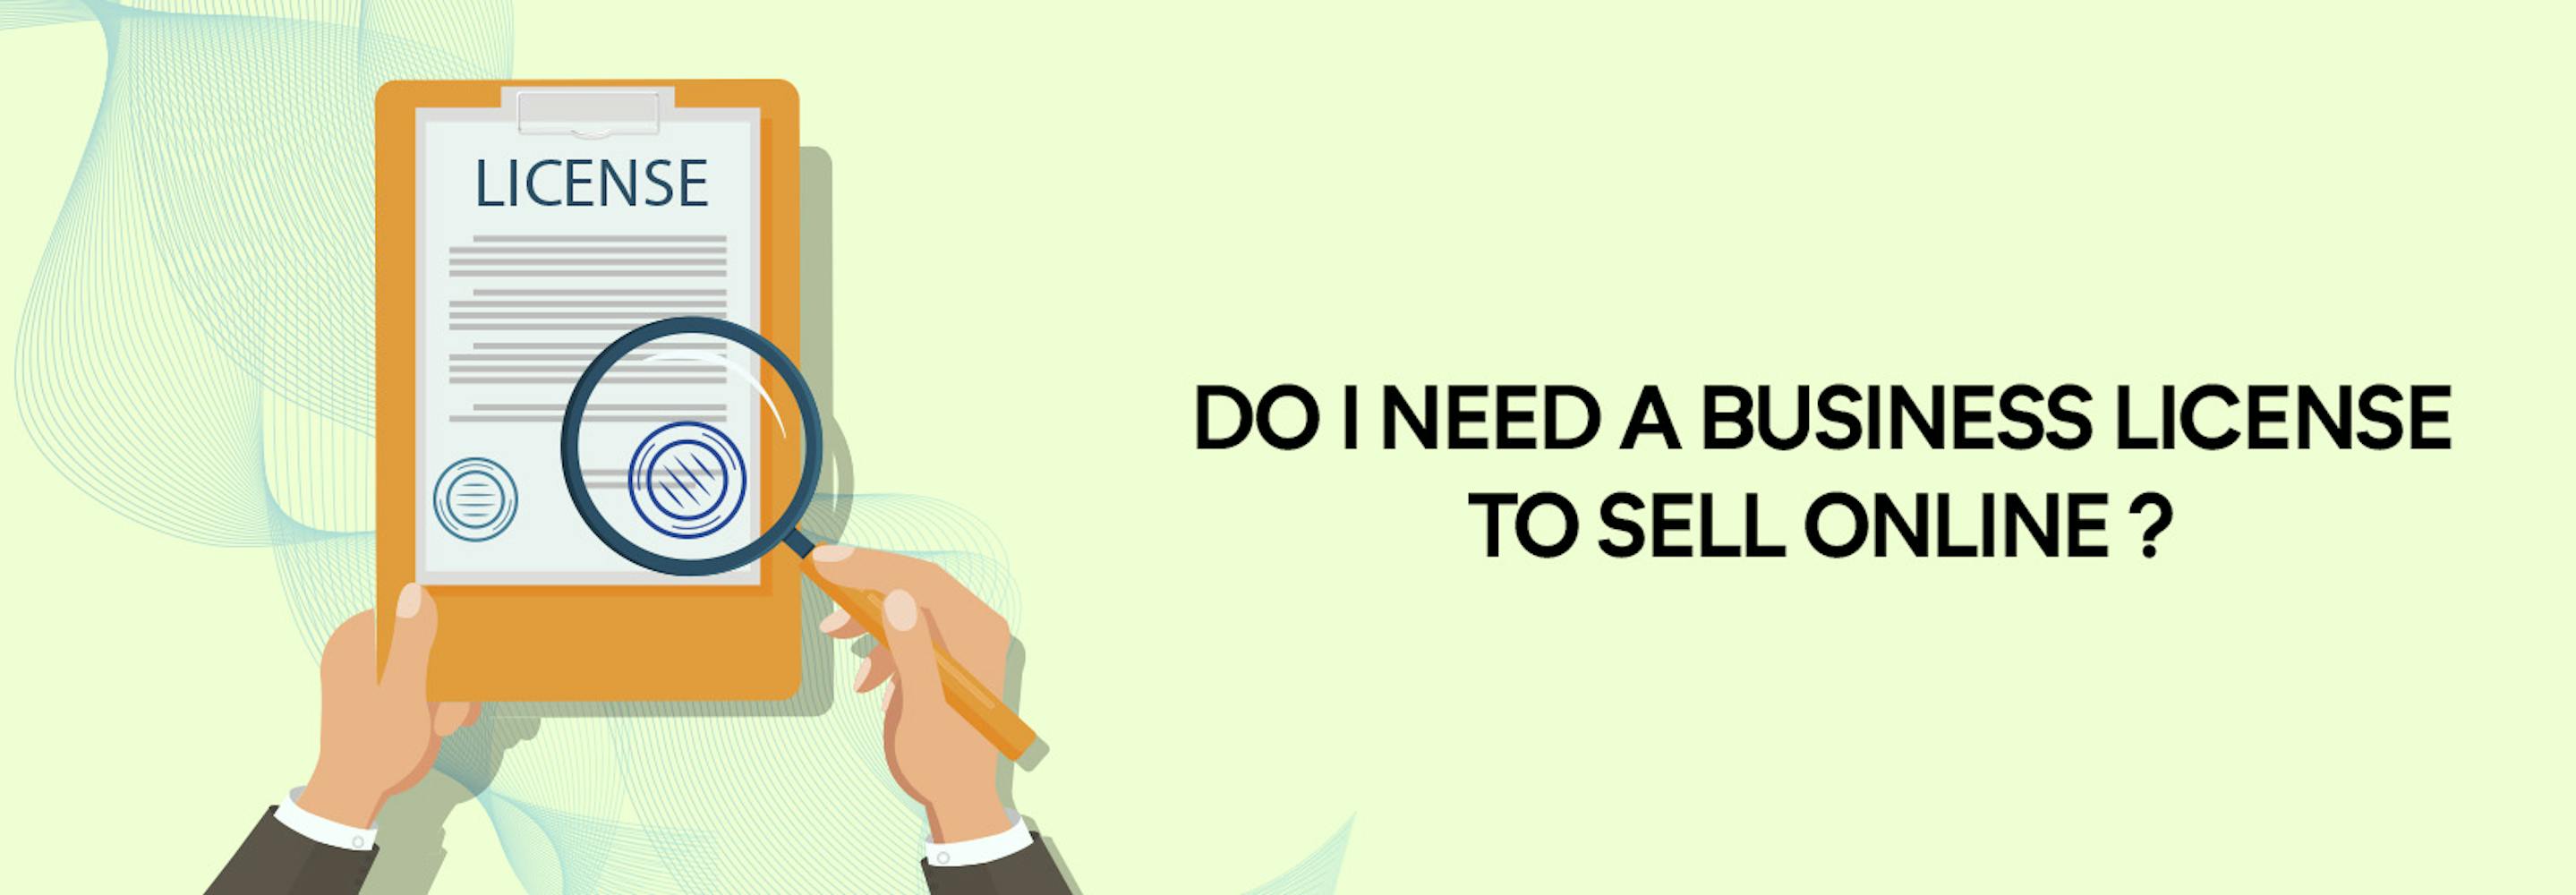 Do I need a business license to sell online? 